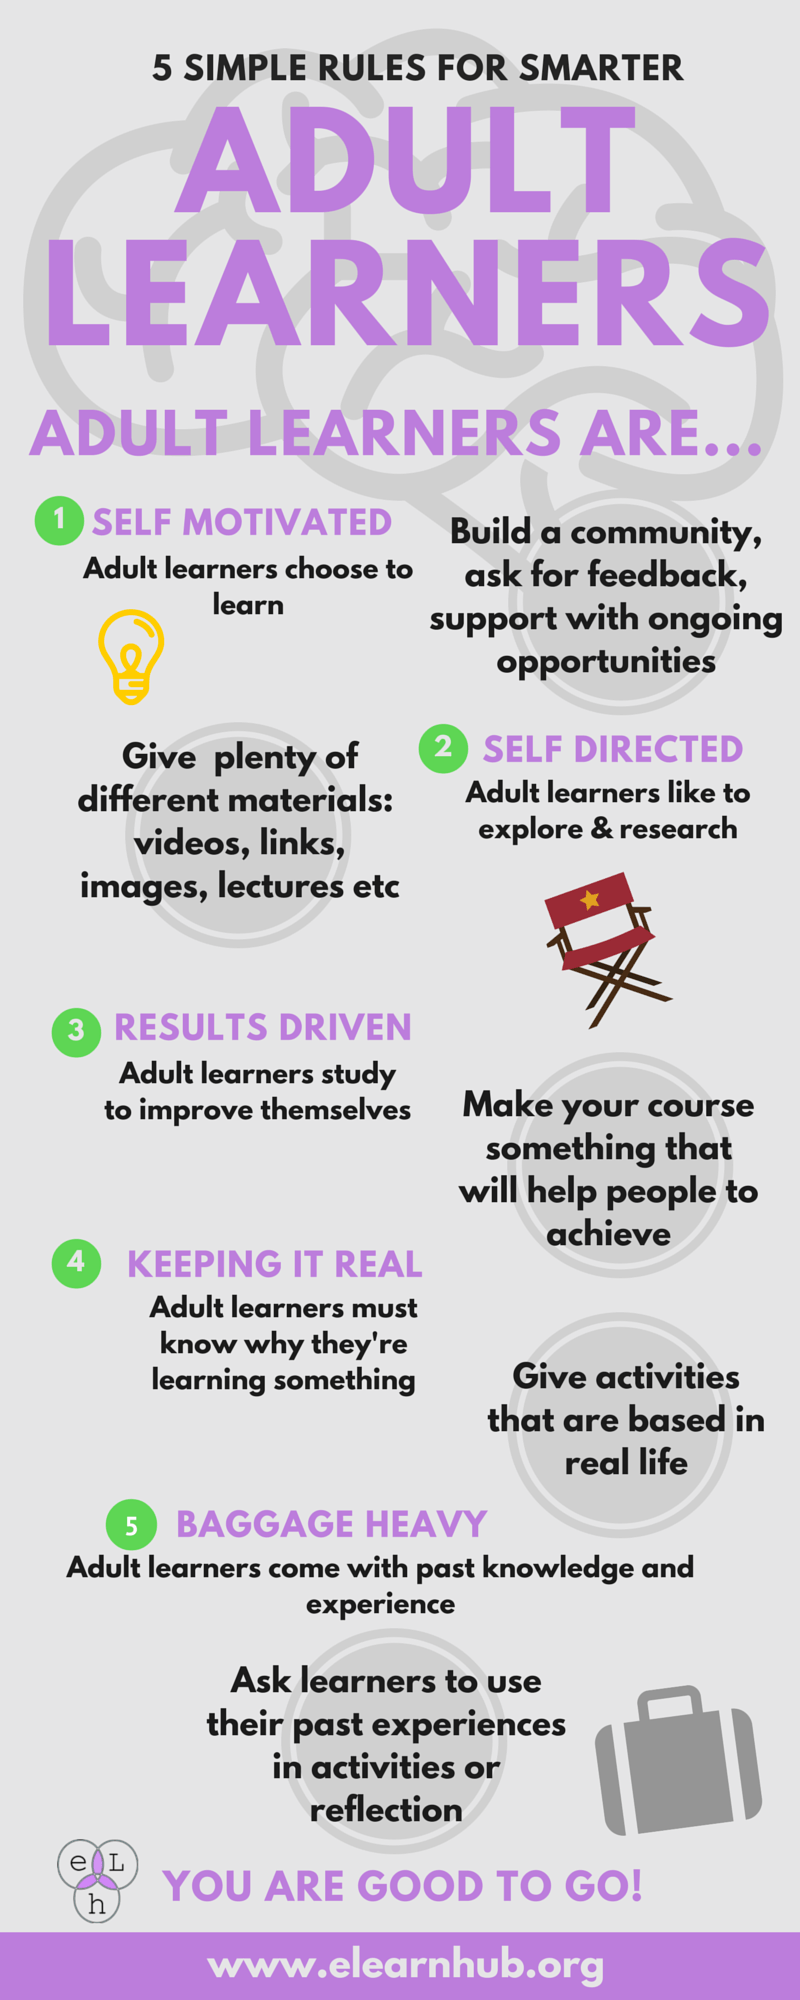 5 Simple Rules for Smarter Adult Learners - infographic thumbnail